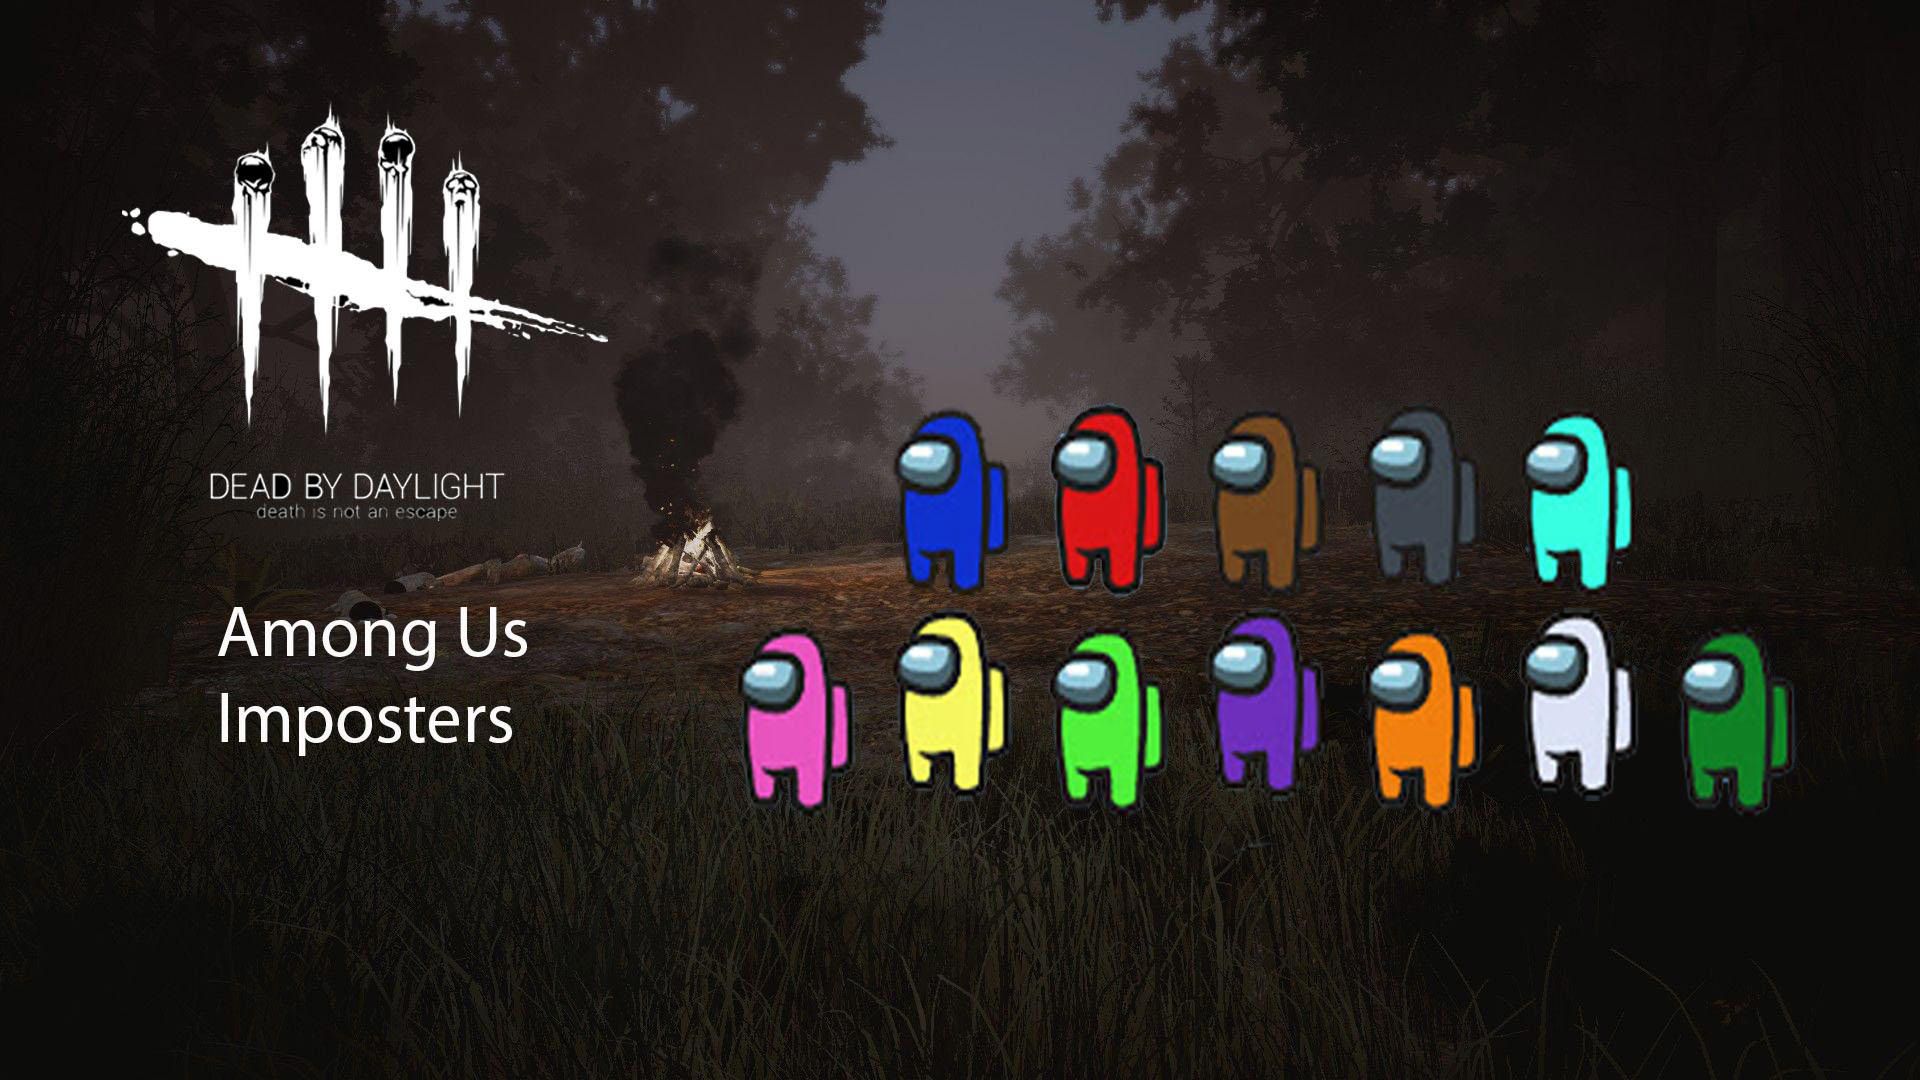 Among Us Imposters x Dead By Daylight Wallpaper, HD Games 4K Wallpaper, Image, Photo and Background